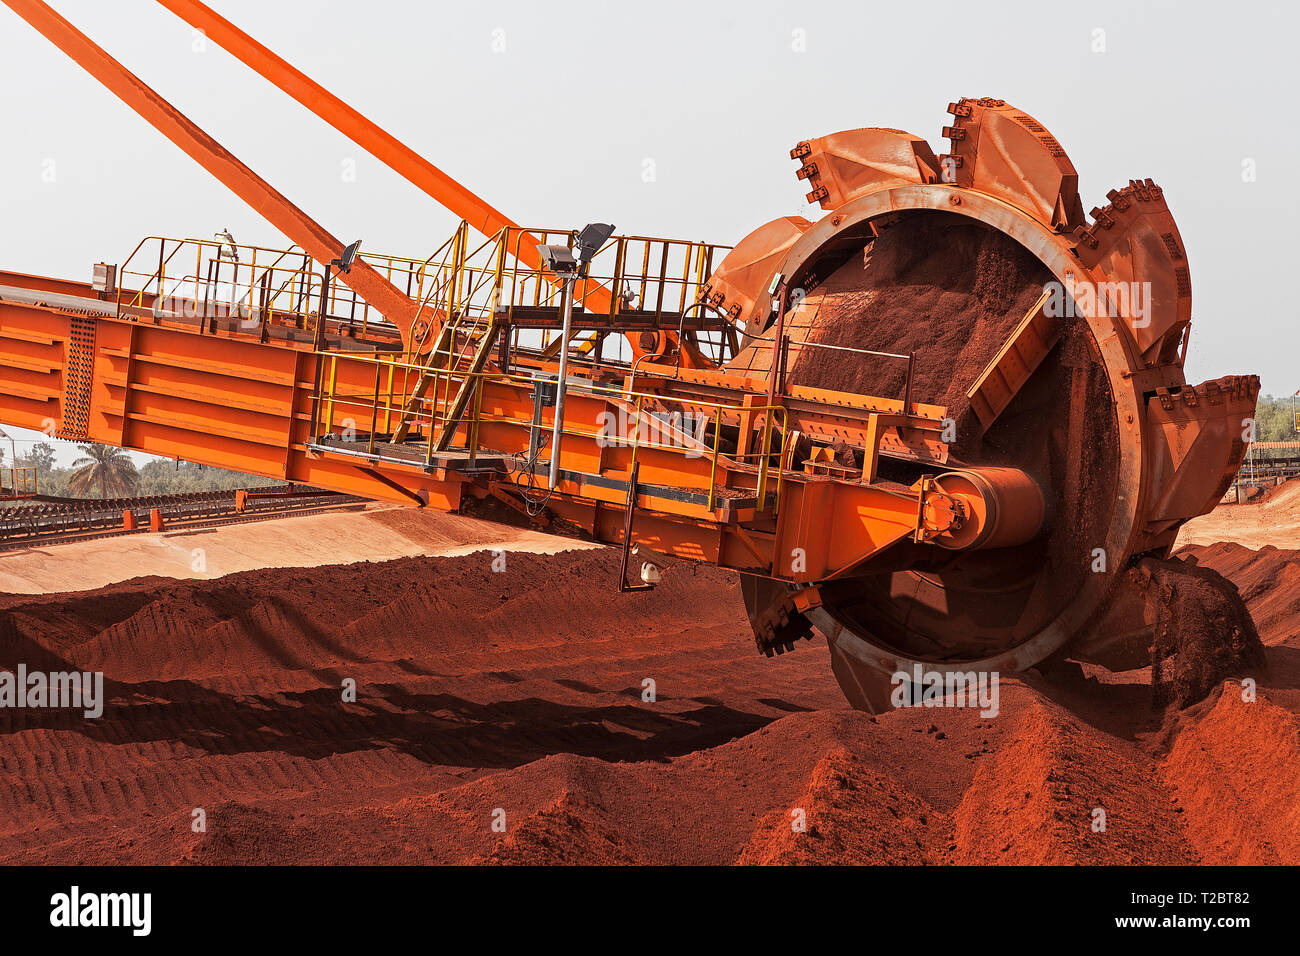 Port operations for managing and transporting iron ore. Bucket wheel of reclaimmer stacker using buckets to stack ore from stock on conveyor to ship Stock Photo